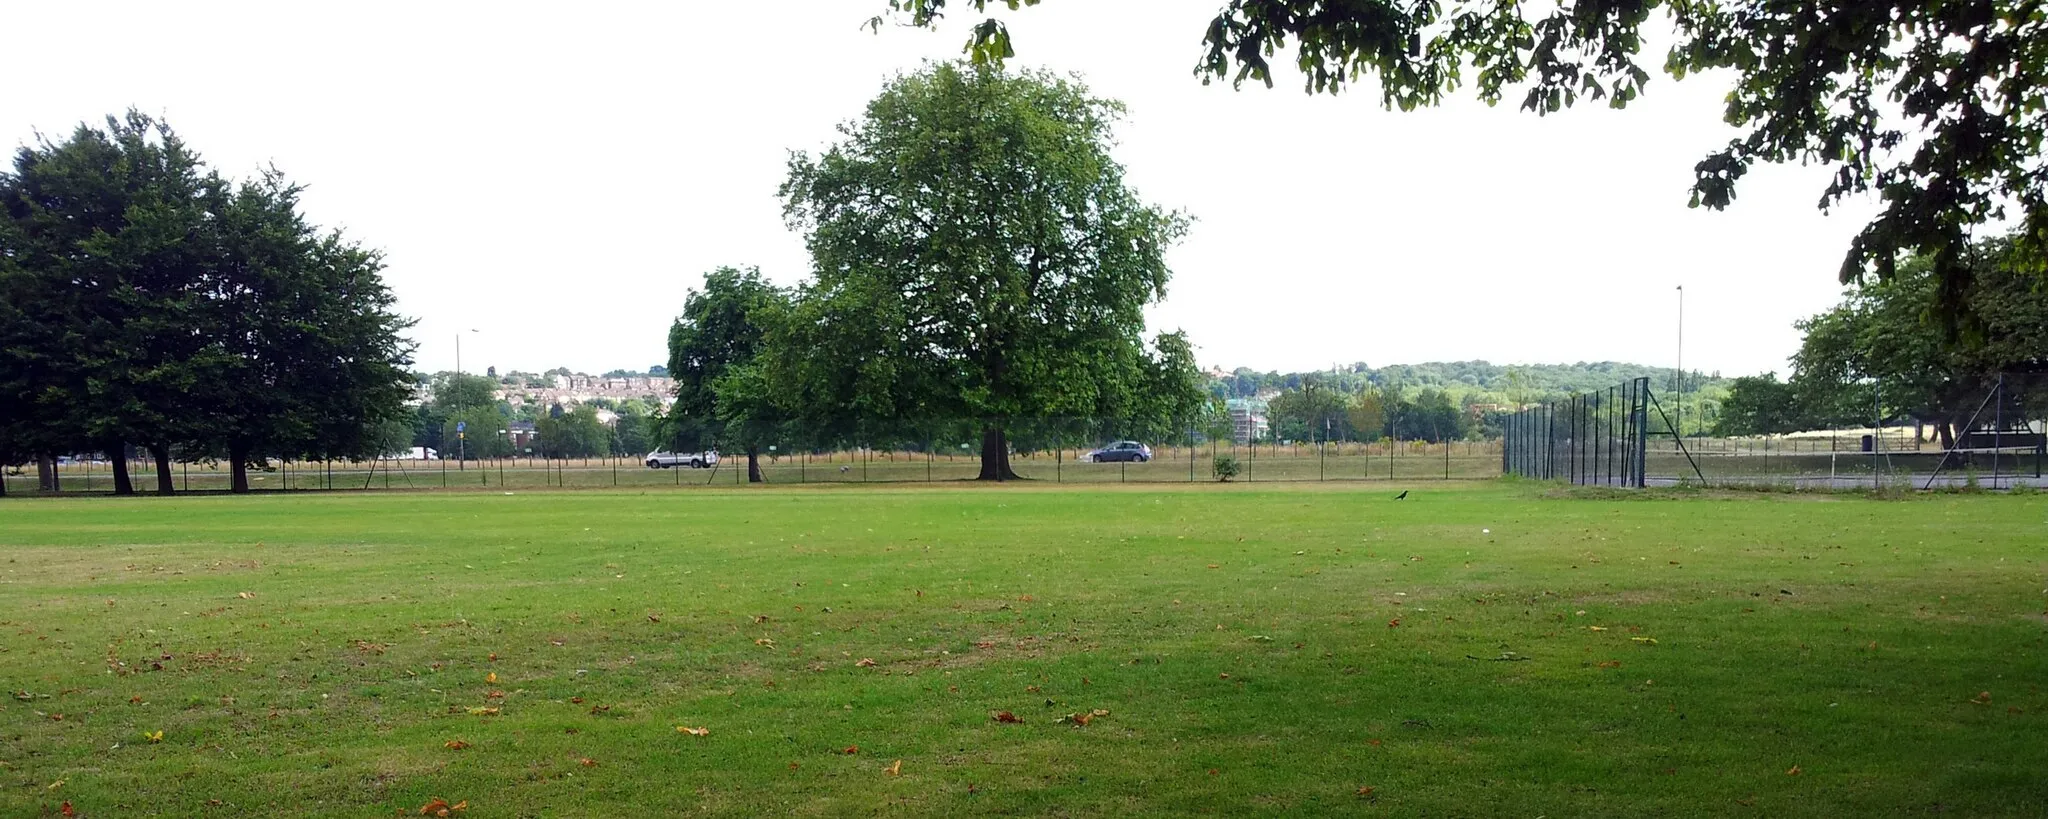 Photo showing: View of the southern section of Woolwich Common with Ha-ha road, Woolwich, Southeast London. In the foreground Barrack Field (Royal Arillery Barracks). In the background Shooters Hill.